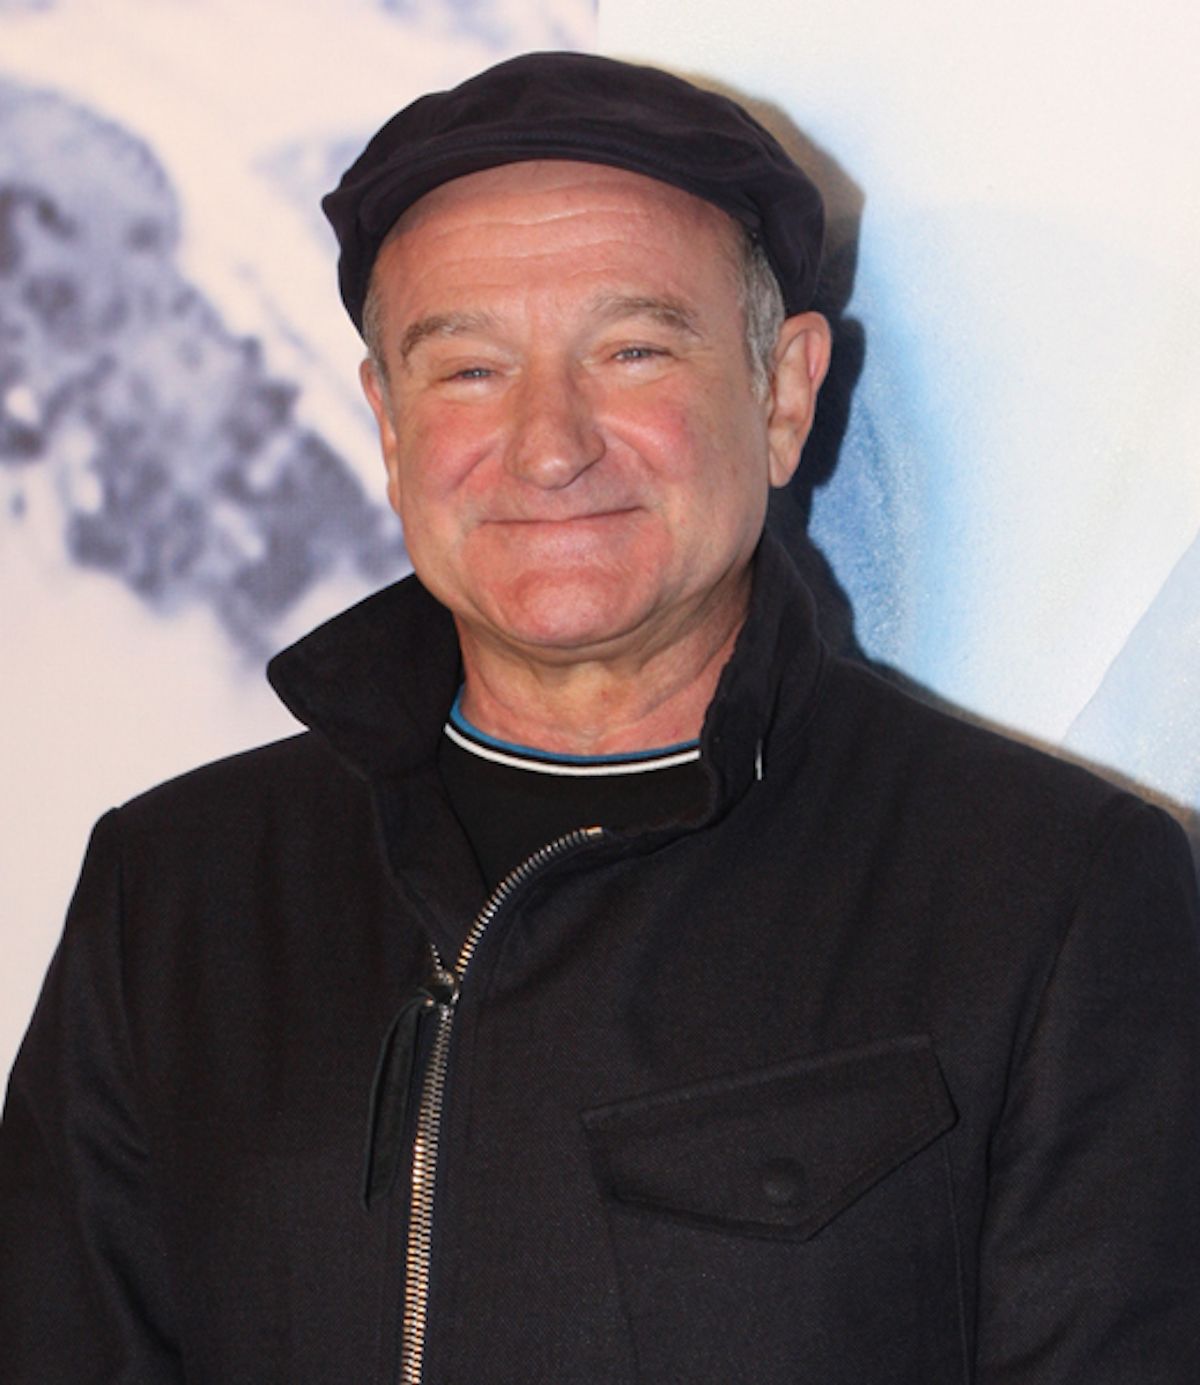 I'm Still Not OK With Robin Williams' Passing